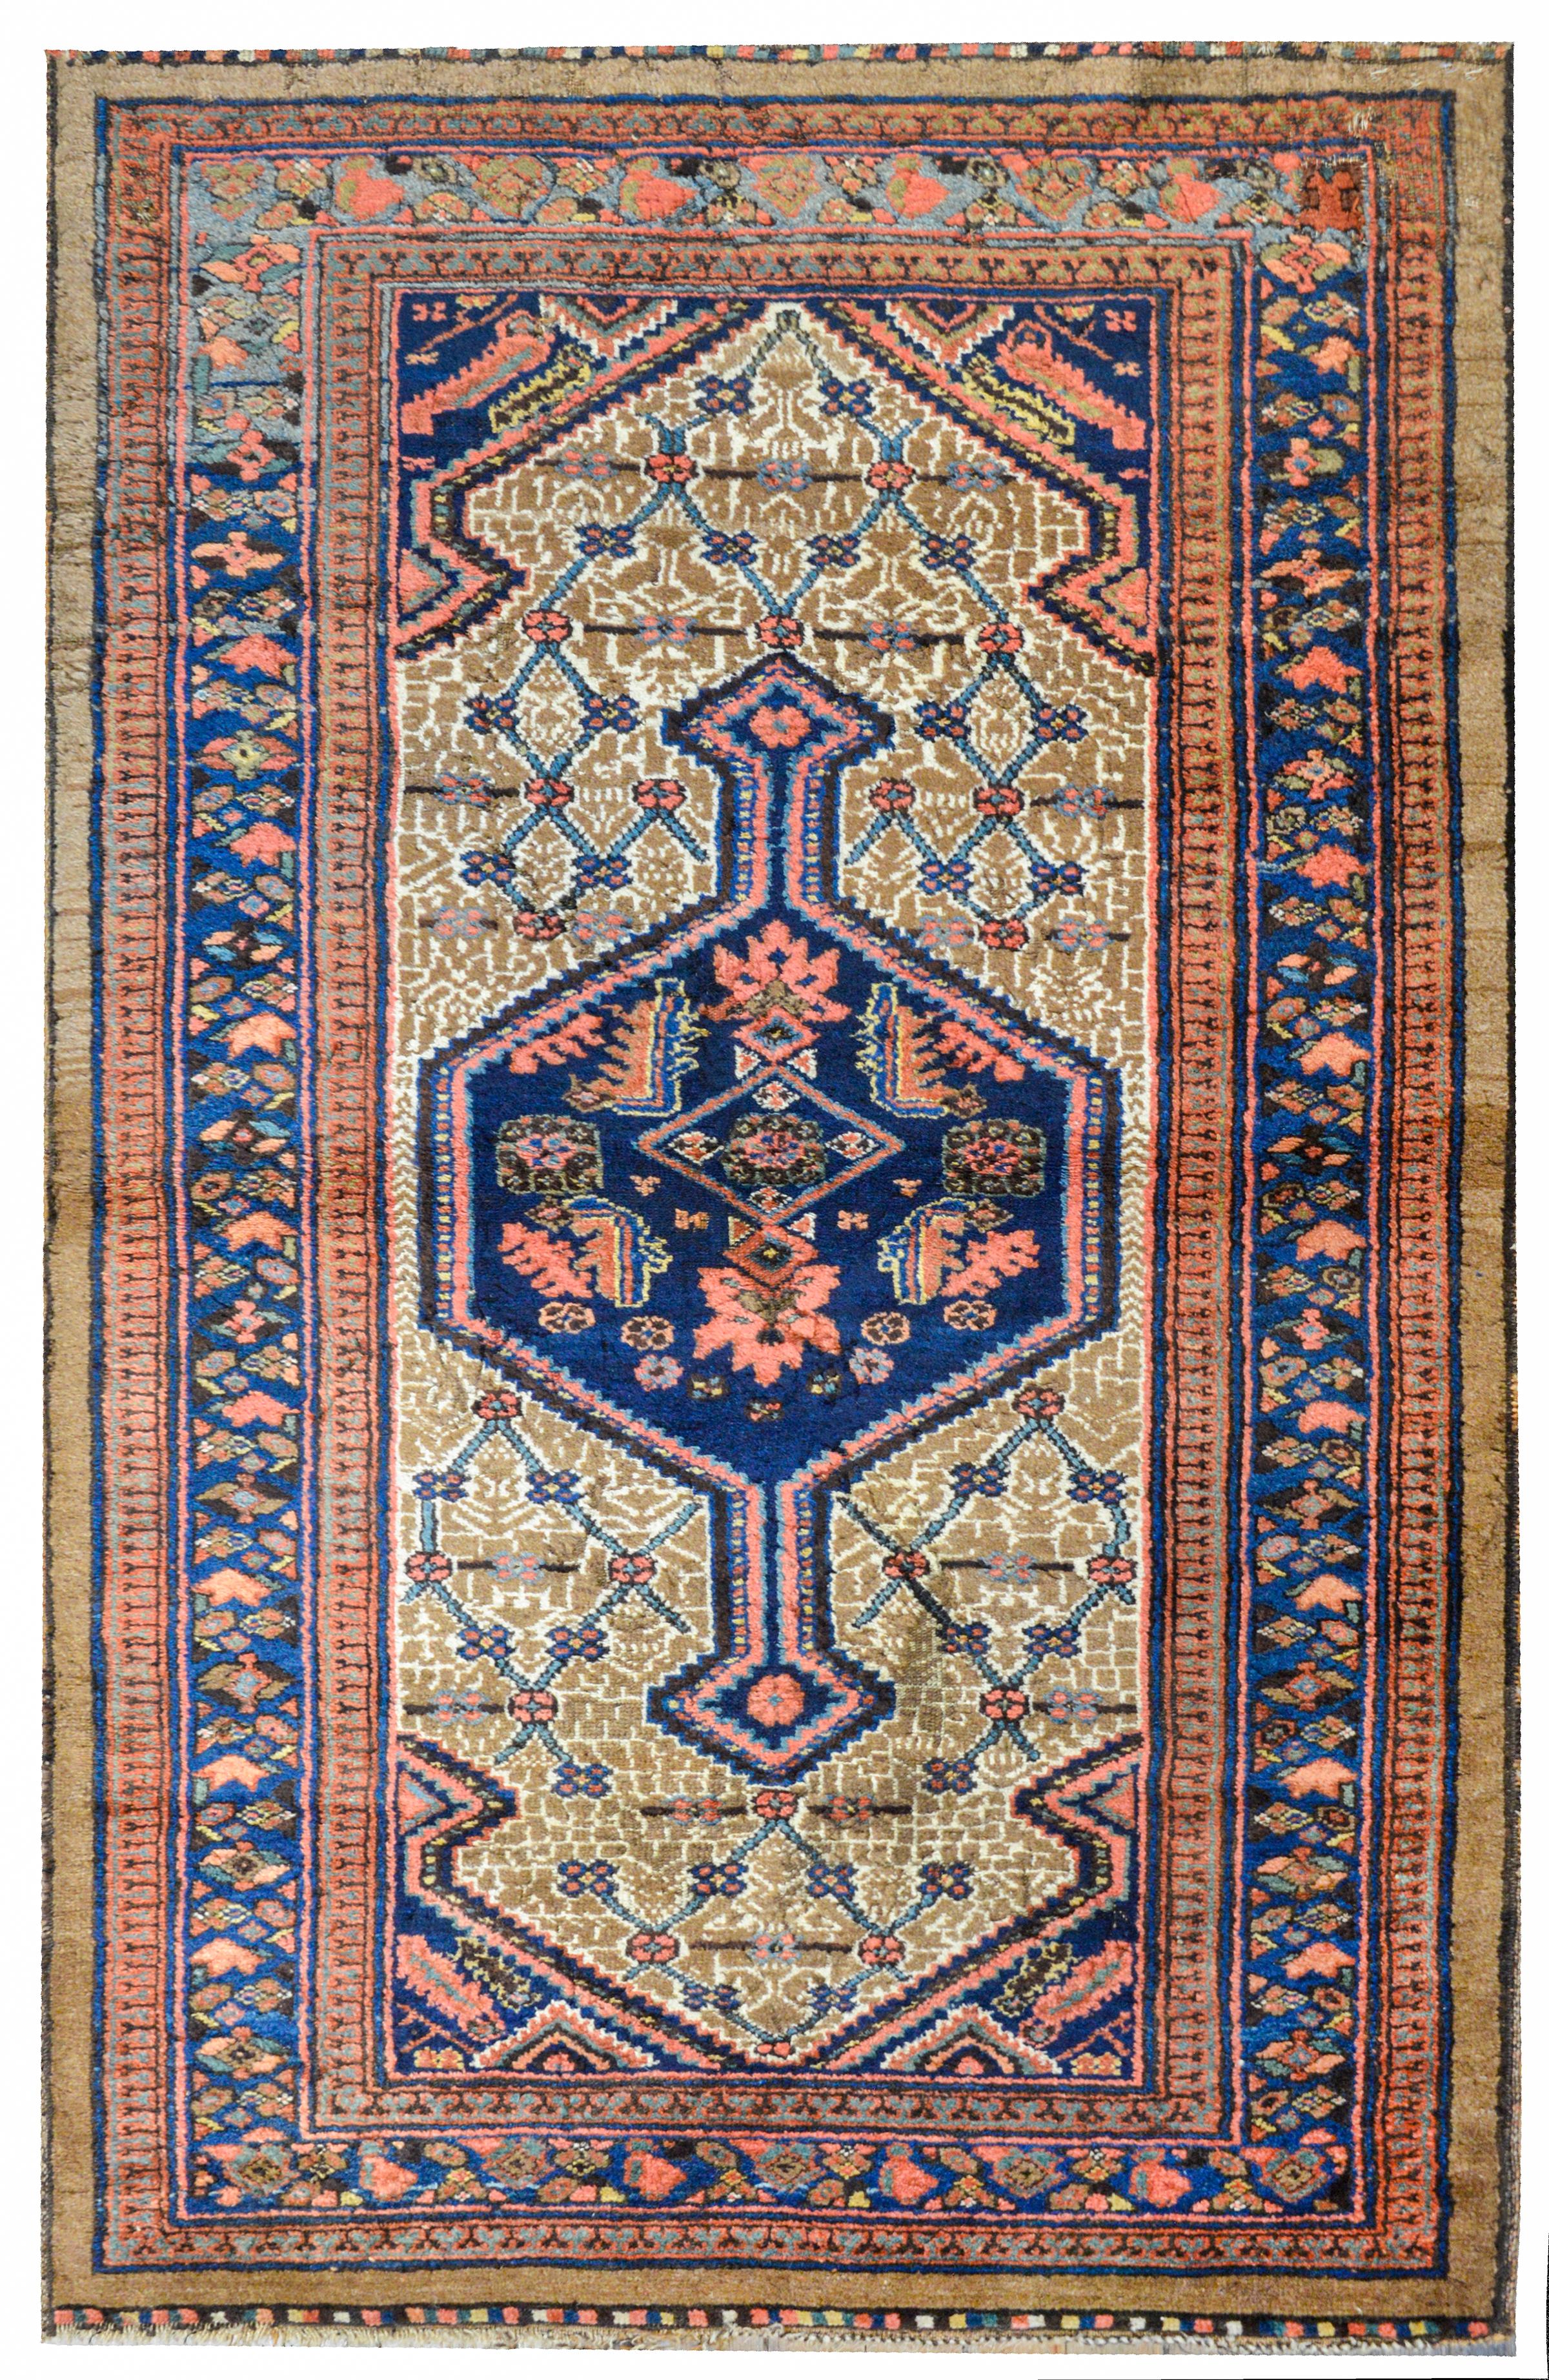 An outstanding early 20th century Persian Serab rug with a large hexagonal medallion with a floral patterned trellis pattern on a geometric camel colors background. The border is wonderful with a stylized floral pattern on an indigo background